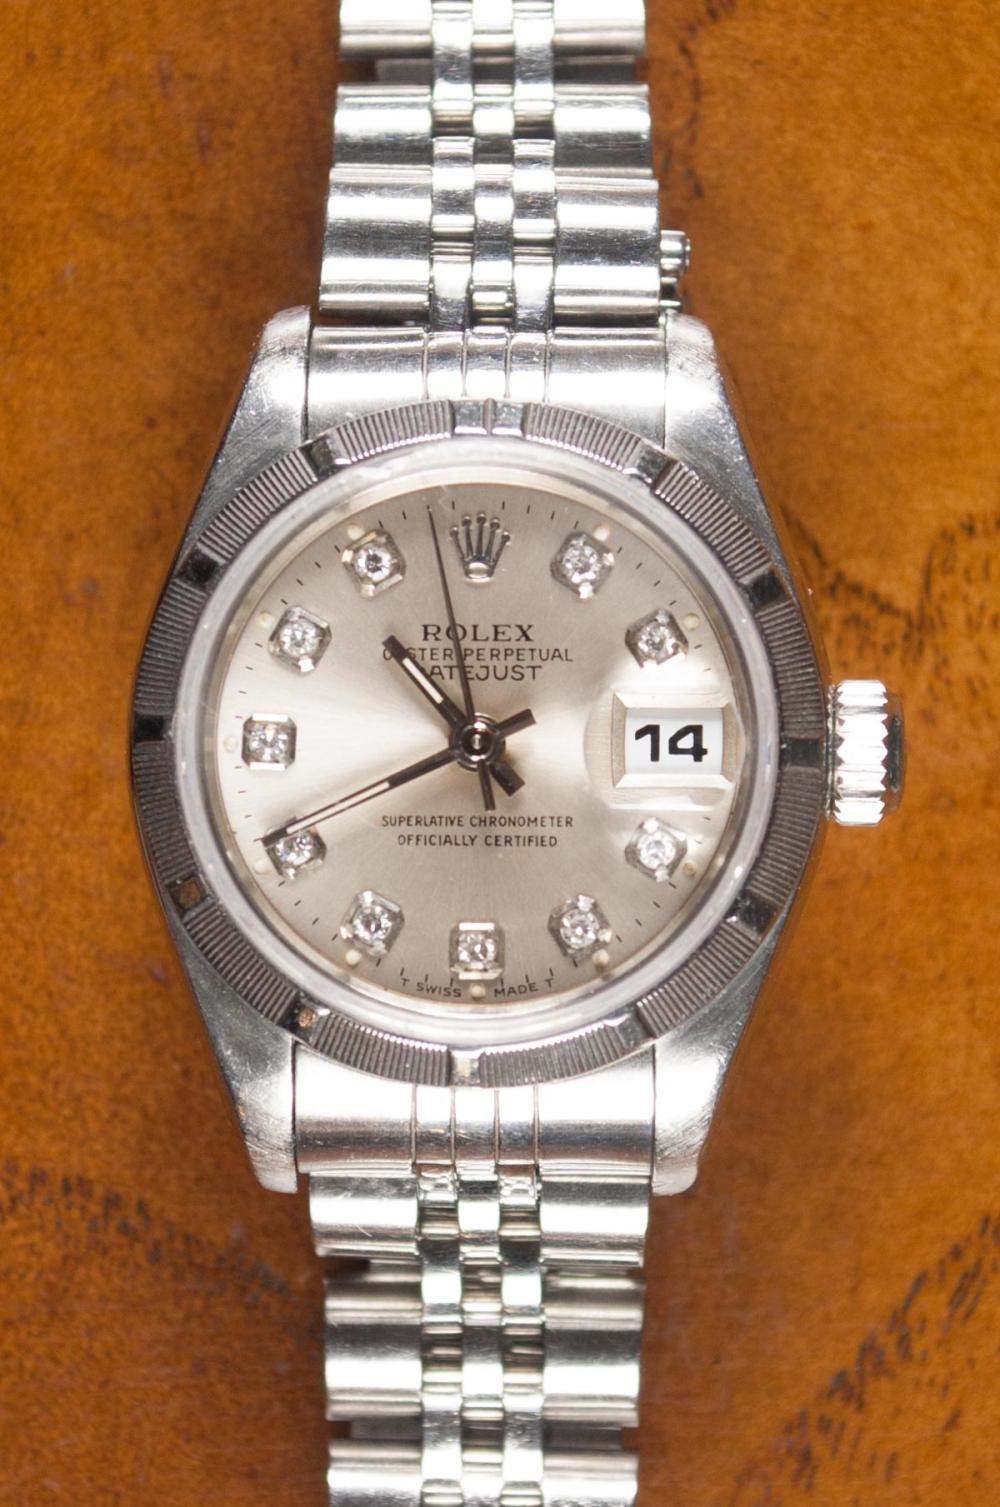 LADY'S ROLEX OYSTER PERPETUAL DATEJUST